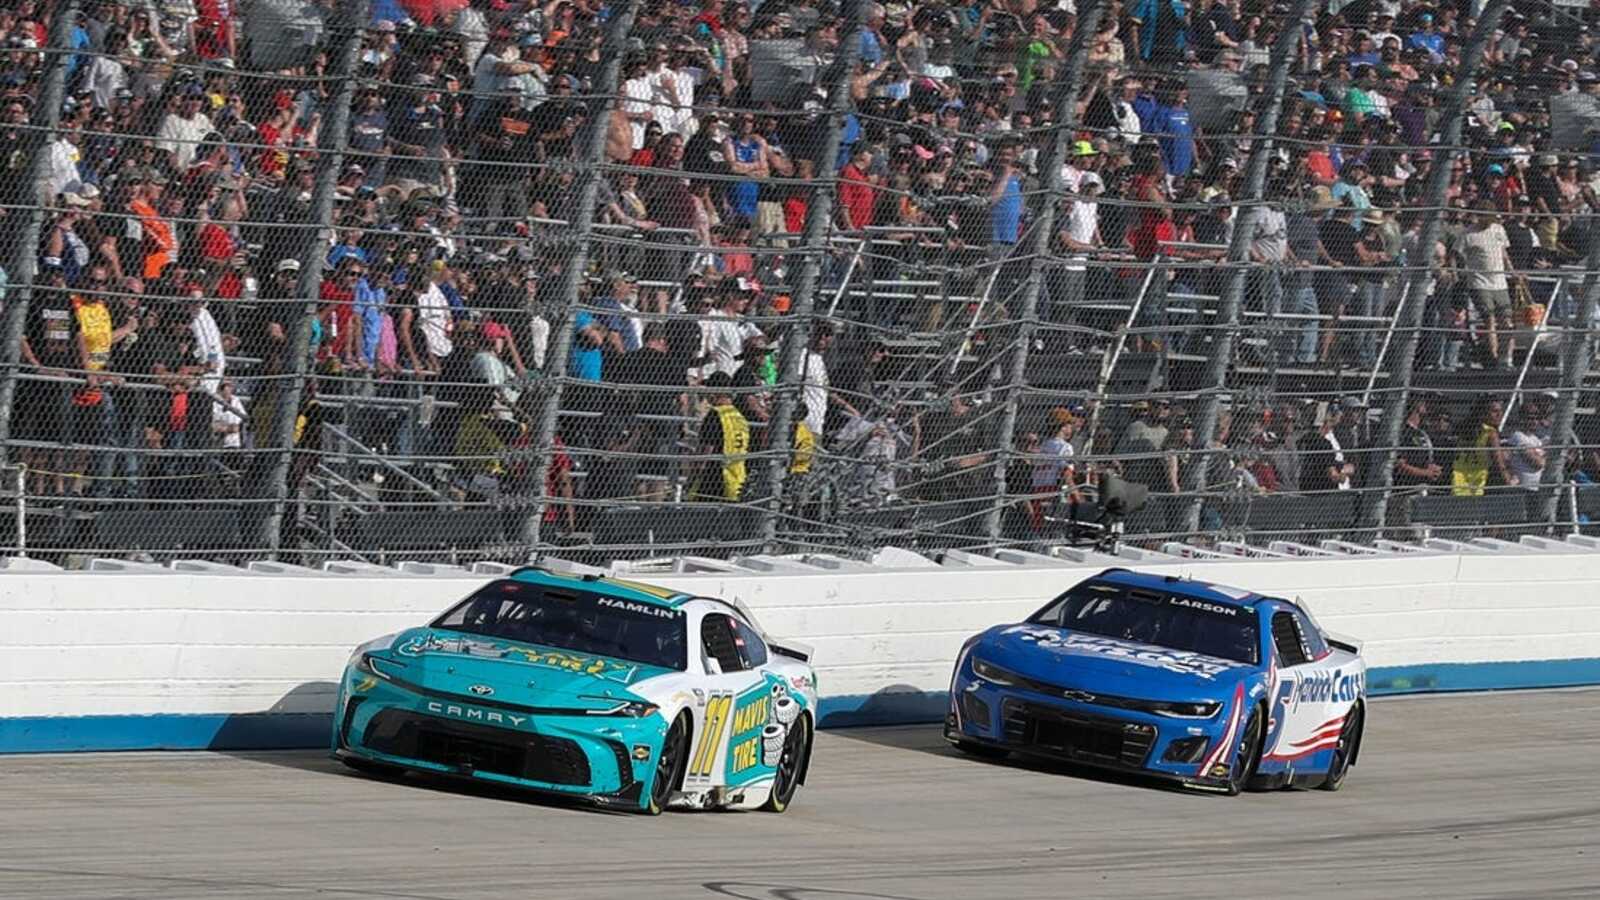 Focus shifts to Kansas for frustrated drivers